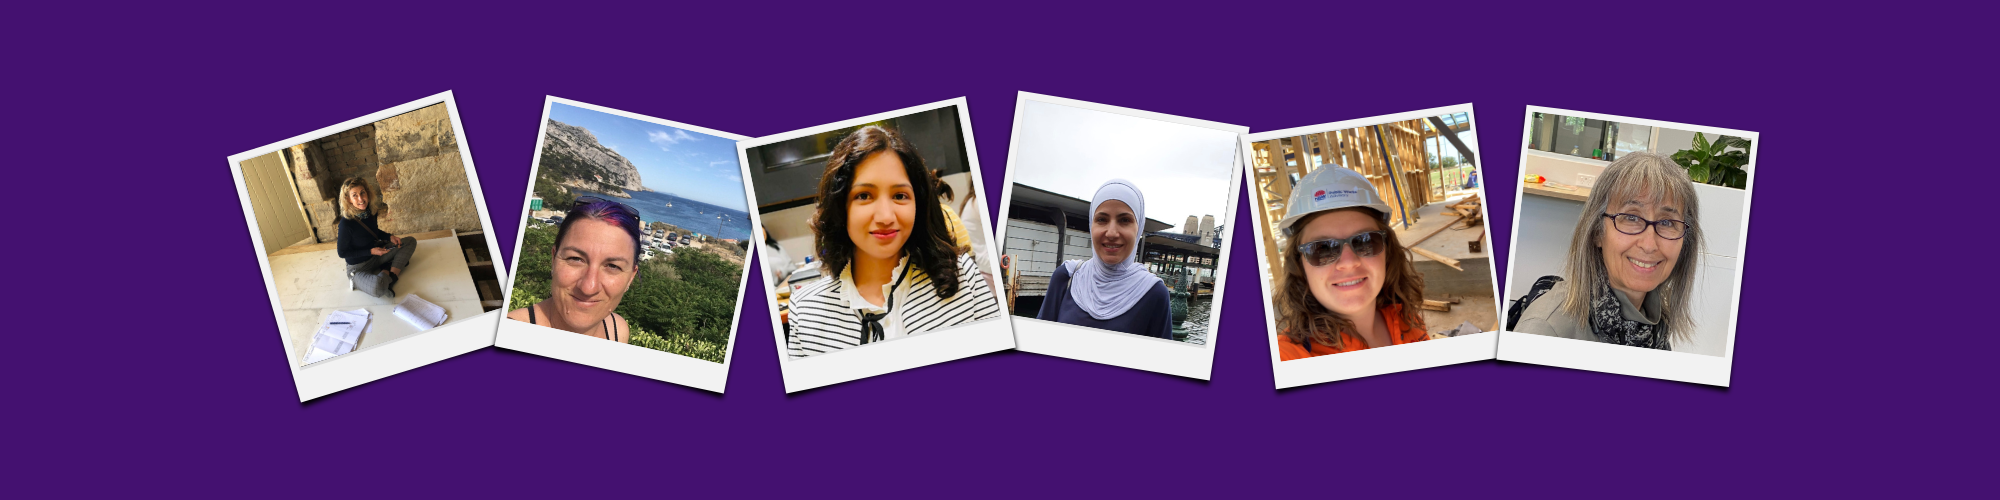 Meet our women engineers, architects, and scientists 